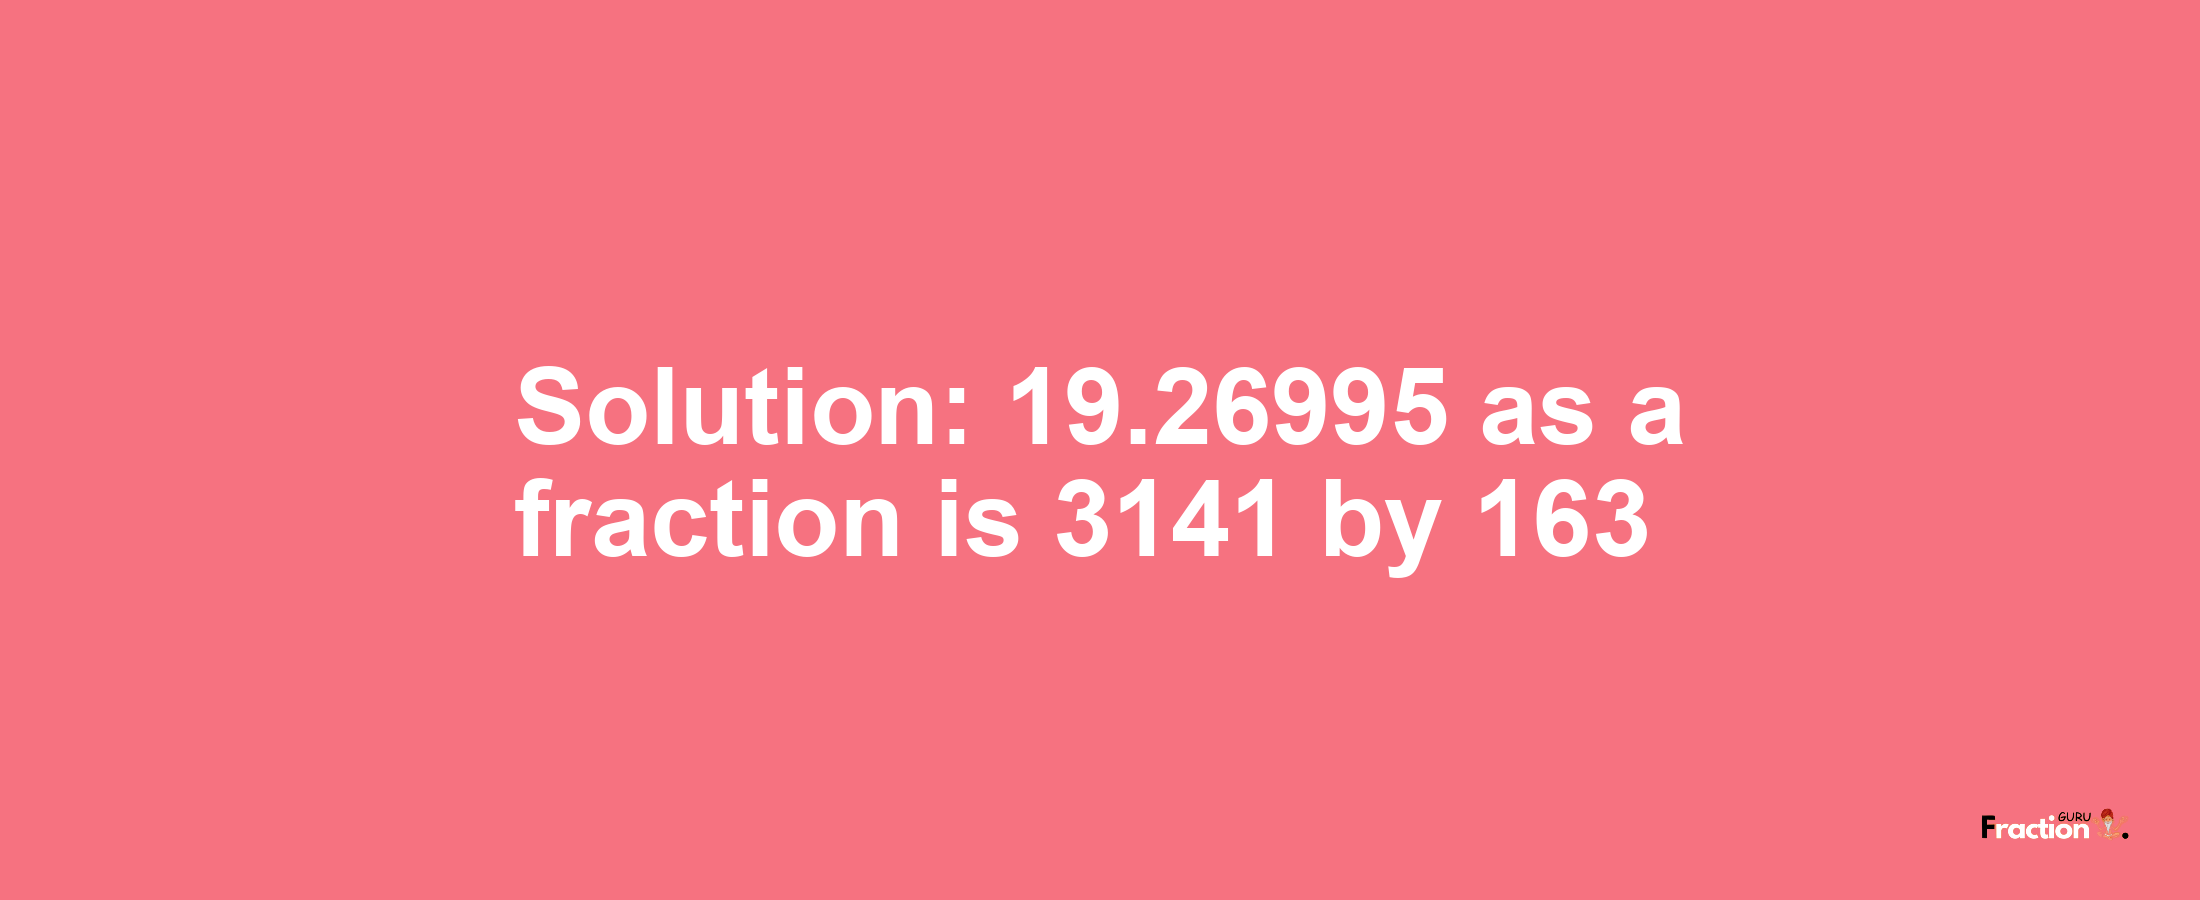 Solution:19.26995 as a fraction is 3141/163